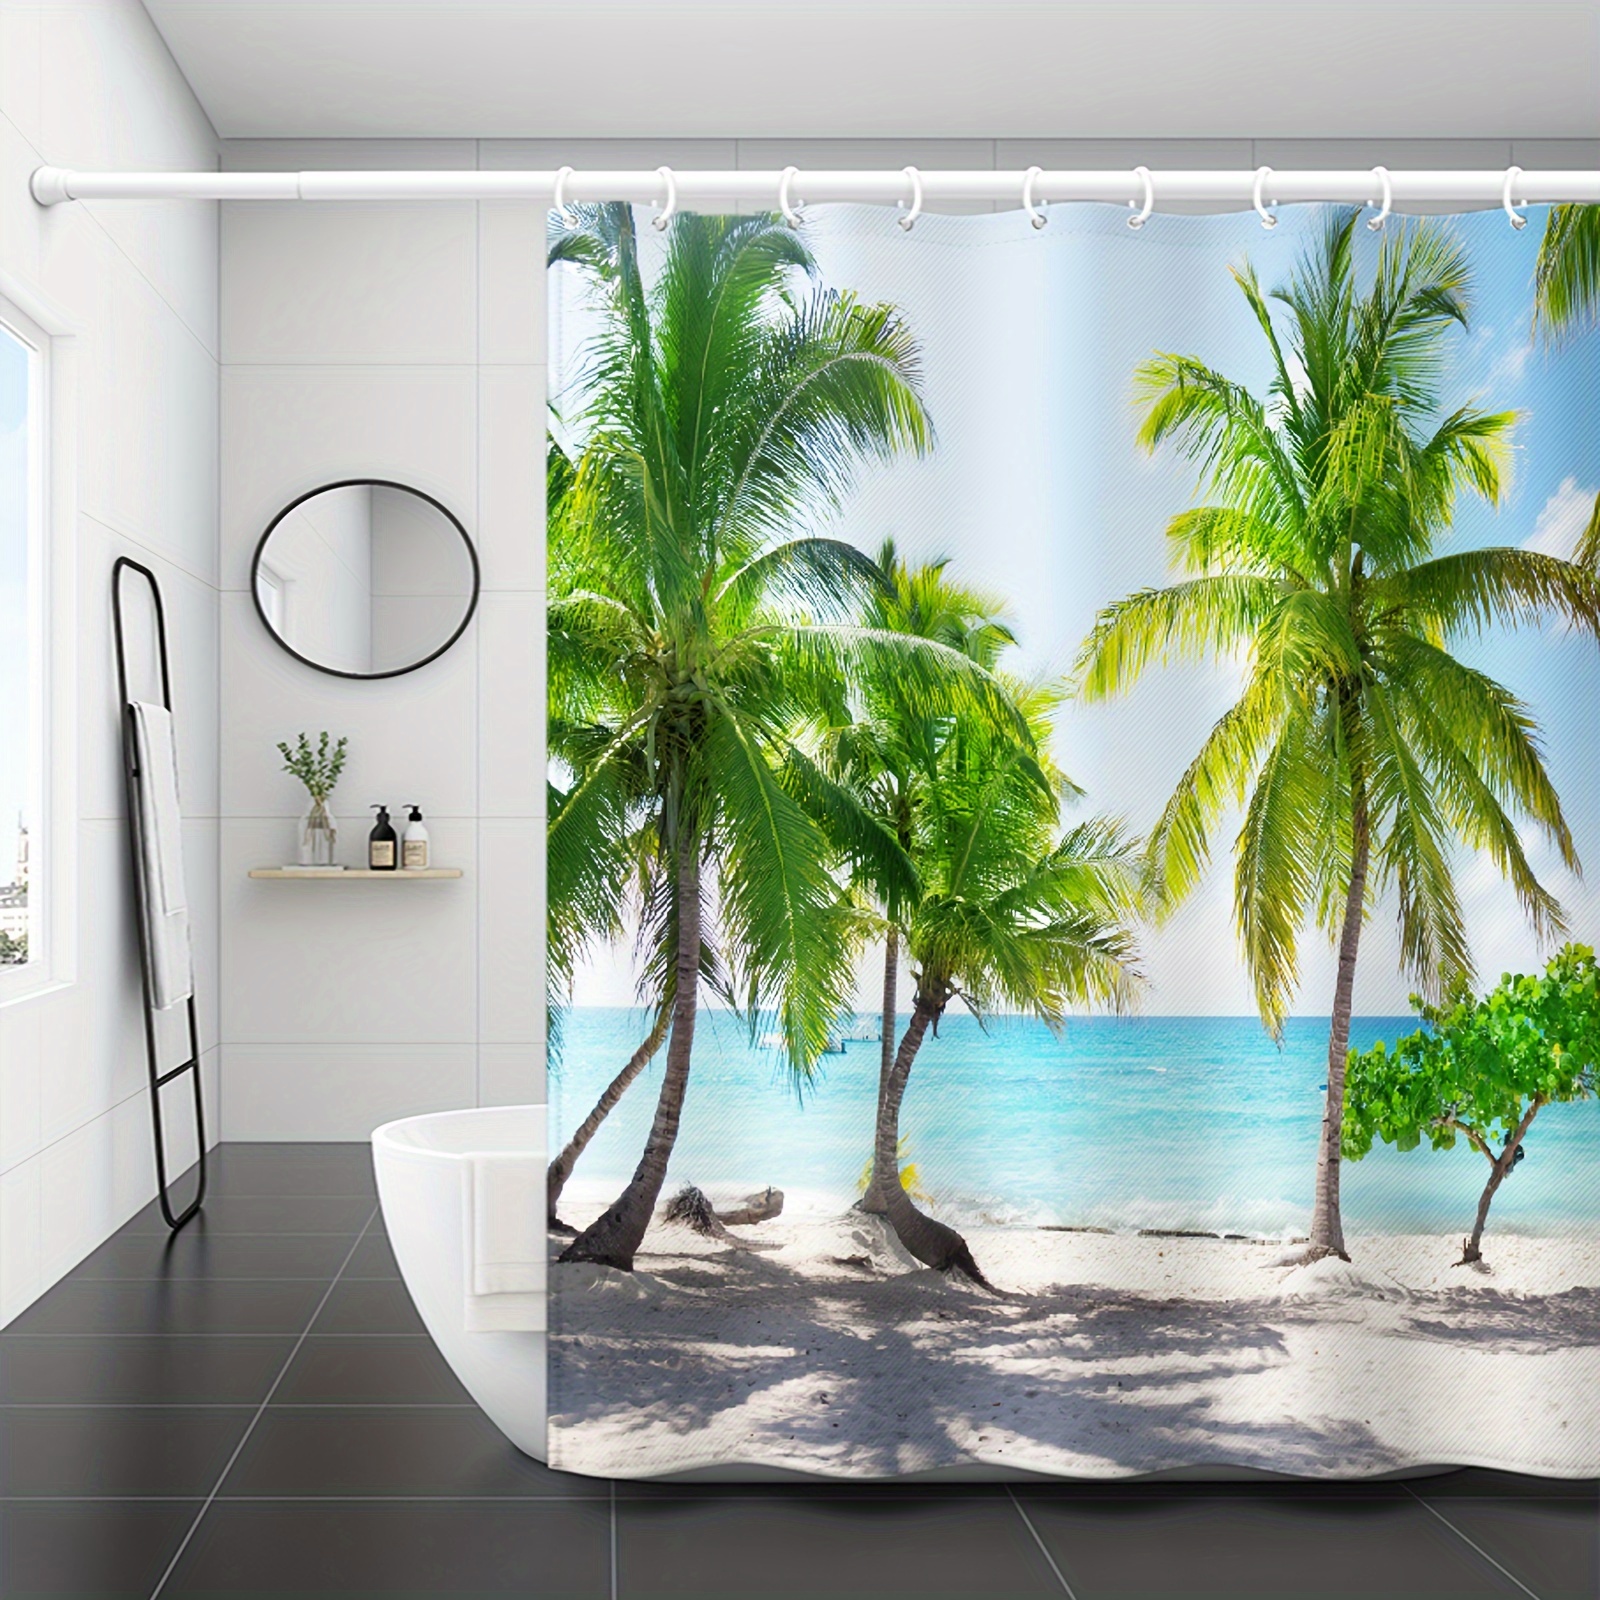 

1pc Tropical Beach Shower Curtain, 70.8 X 70.8 Inches, Waterproof Fabric Bathroom Decor With Vibrant Palm Tree Design, Ocean Themed Home Decor For Beach Lovers